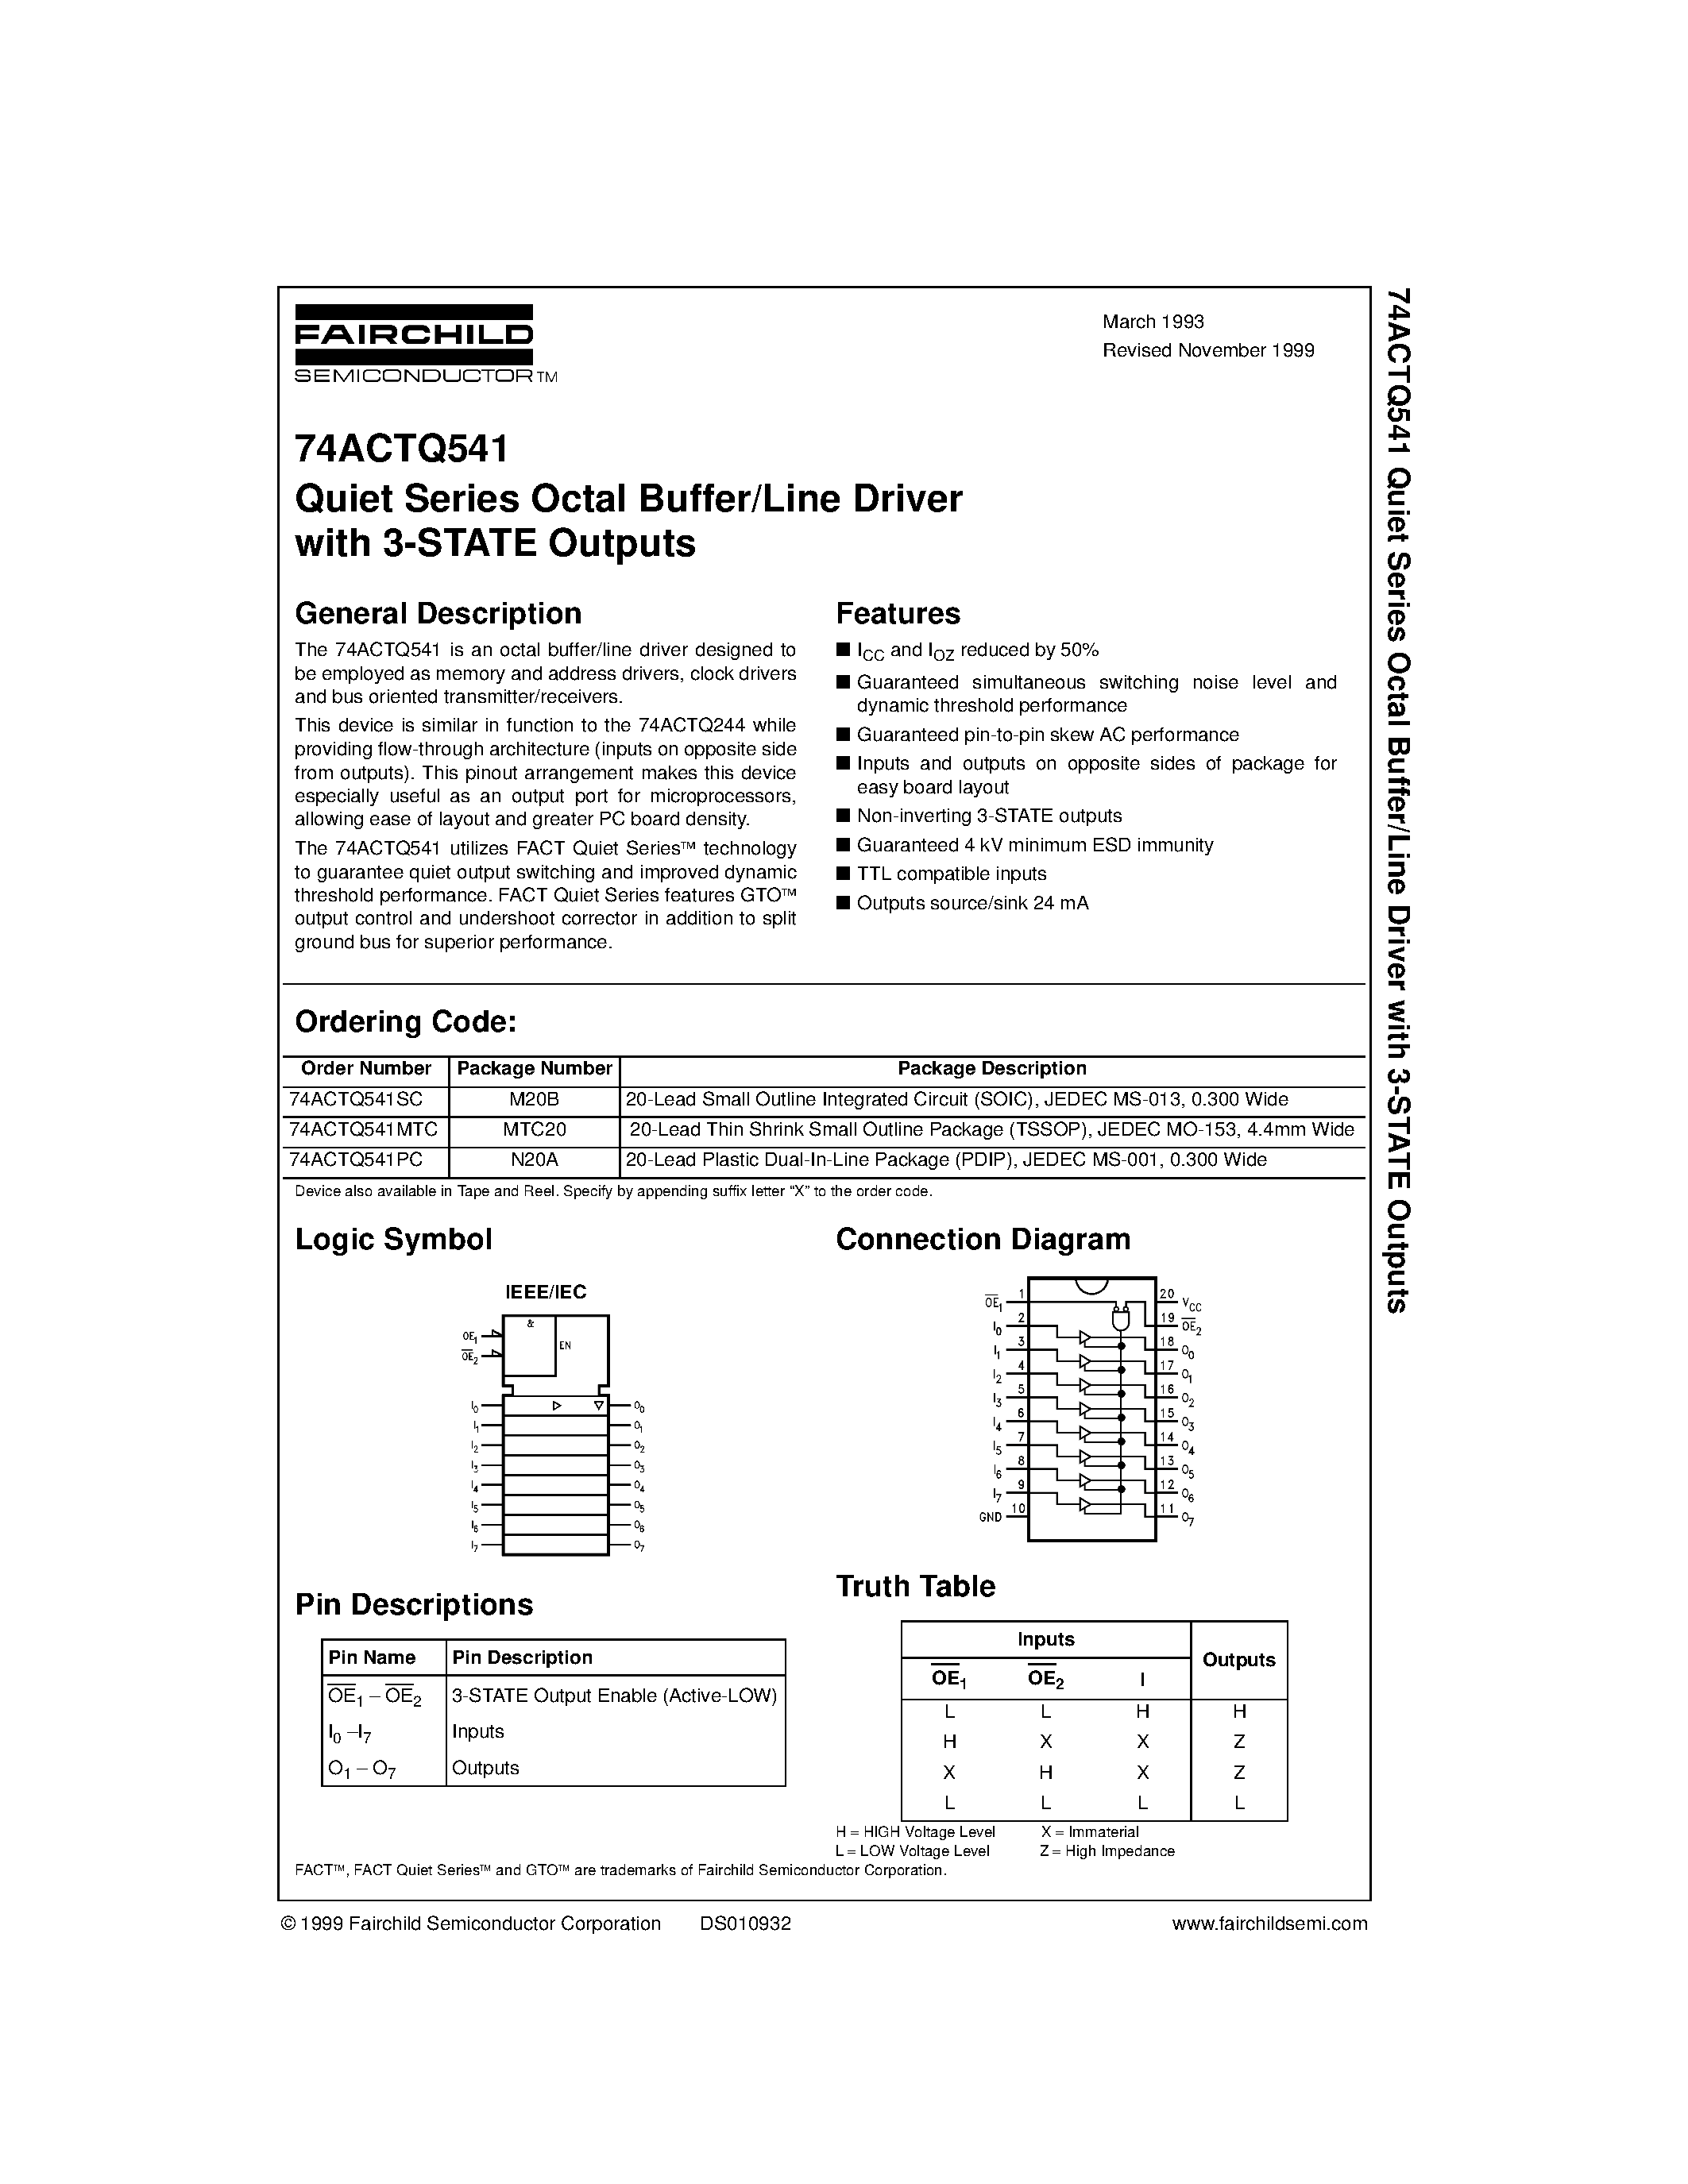 Datasheet 74ACTQ541 - Quiet Series Octal Buffer/Line Driver with 3-STATE Outputs page 1